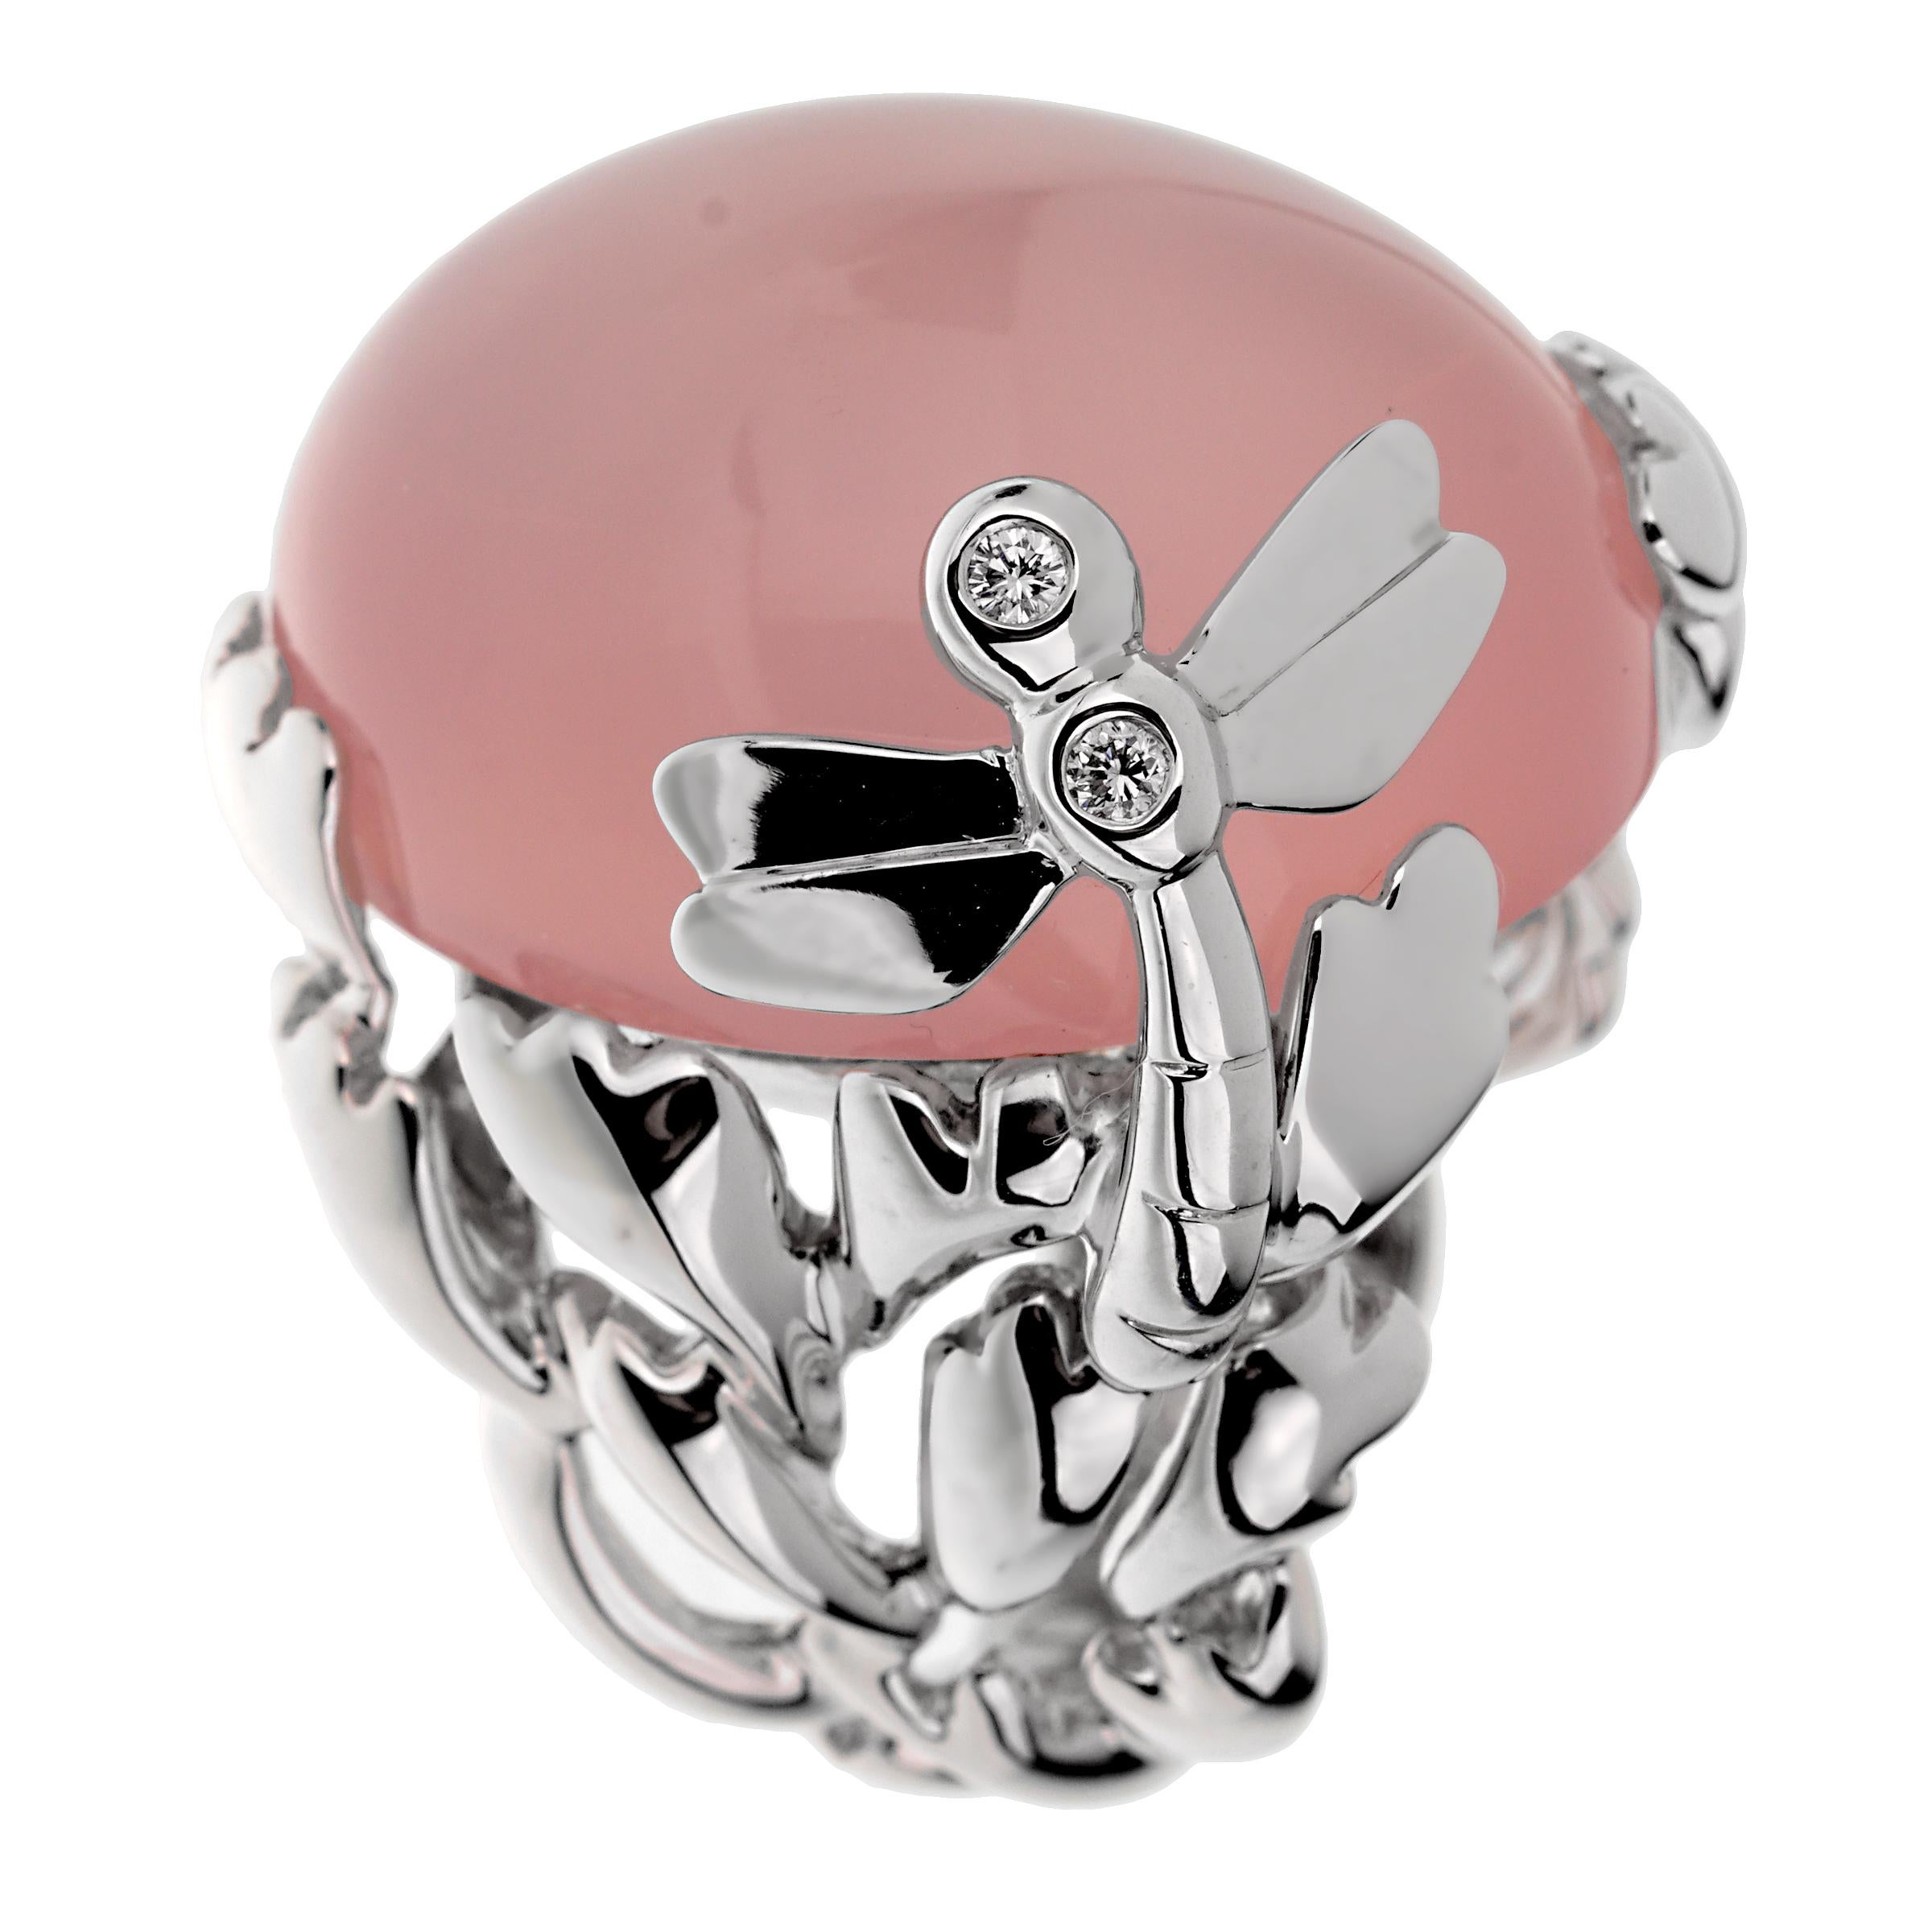 A showstopping Christian Dior cocktail ring boasting a 50ct pink quartz frame with a dragonfly adorned with 2 of the finest round brilliant cut diamonds in 18k white gold. The ring measures a size 51 european

Dior Retail Price: $11,100
Sku: 2772